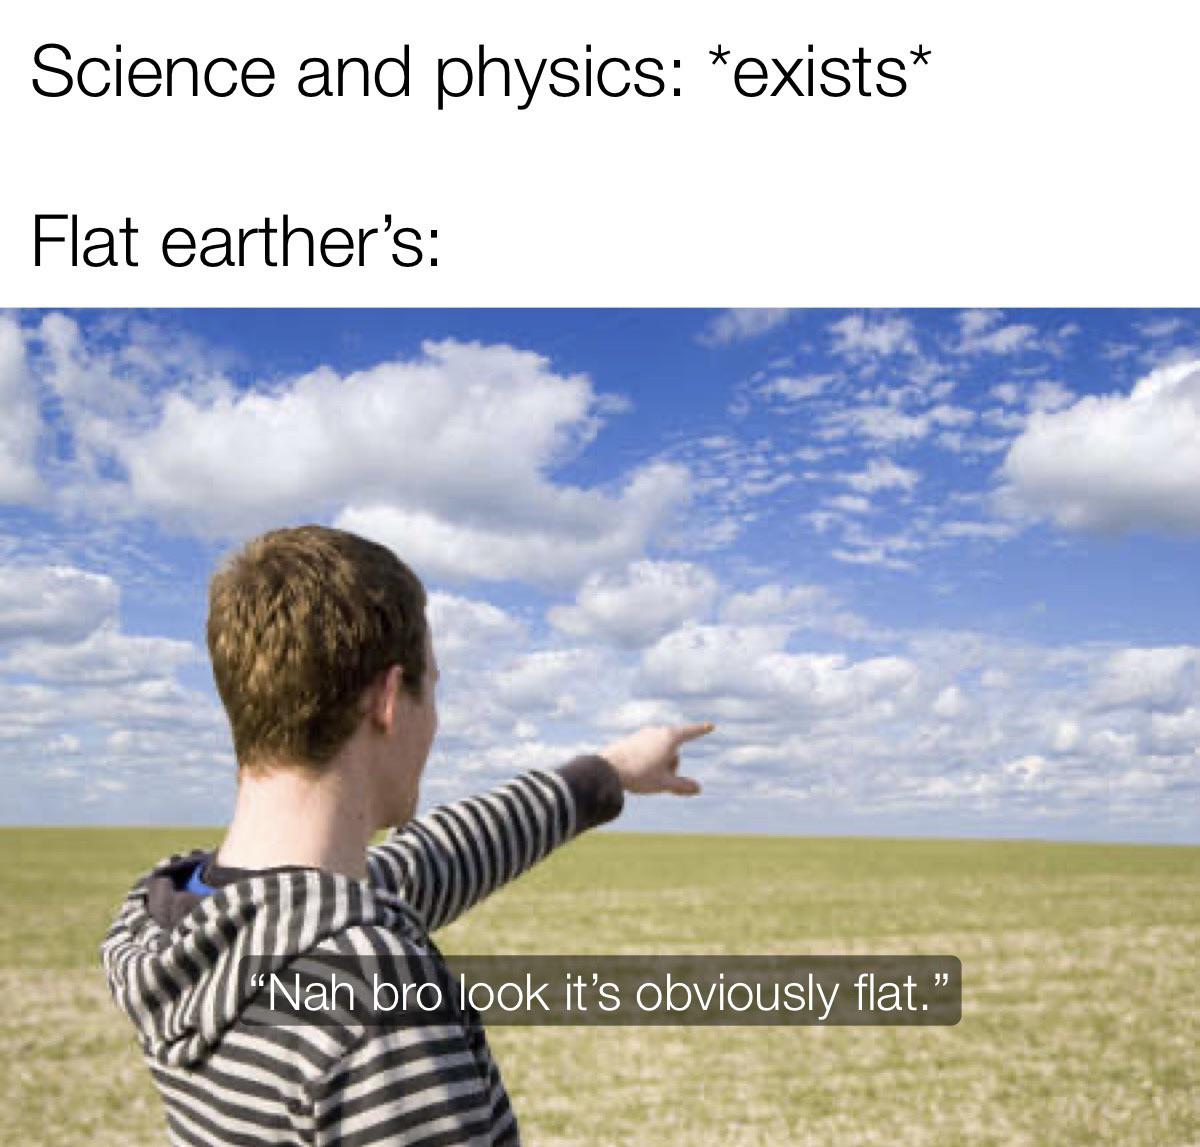 funny memes - sky - Science and physics exists Flat earther's "Nah bro look it's obviously flat."